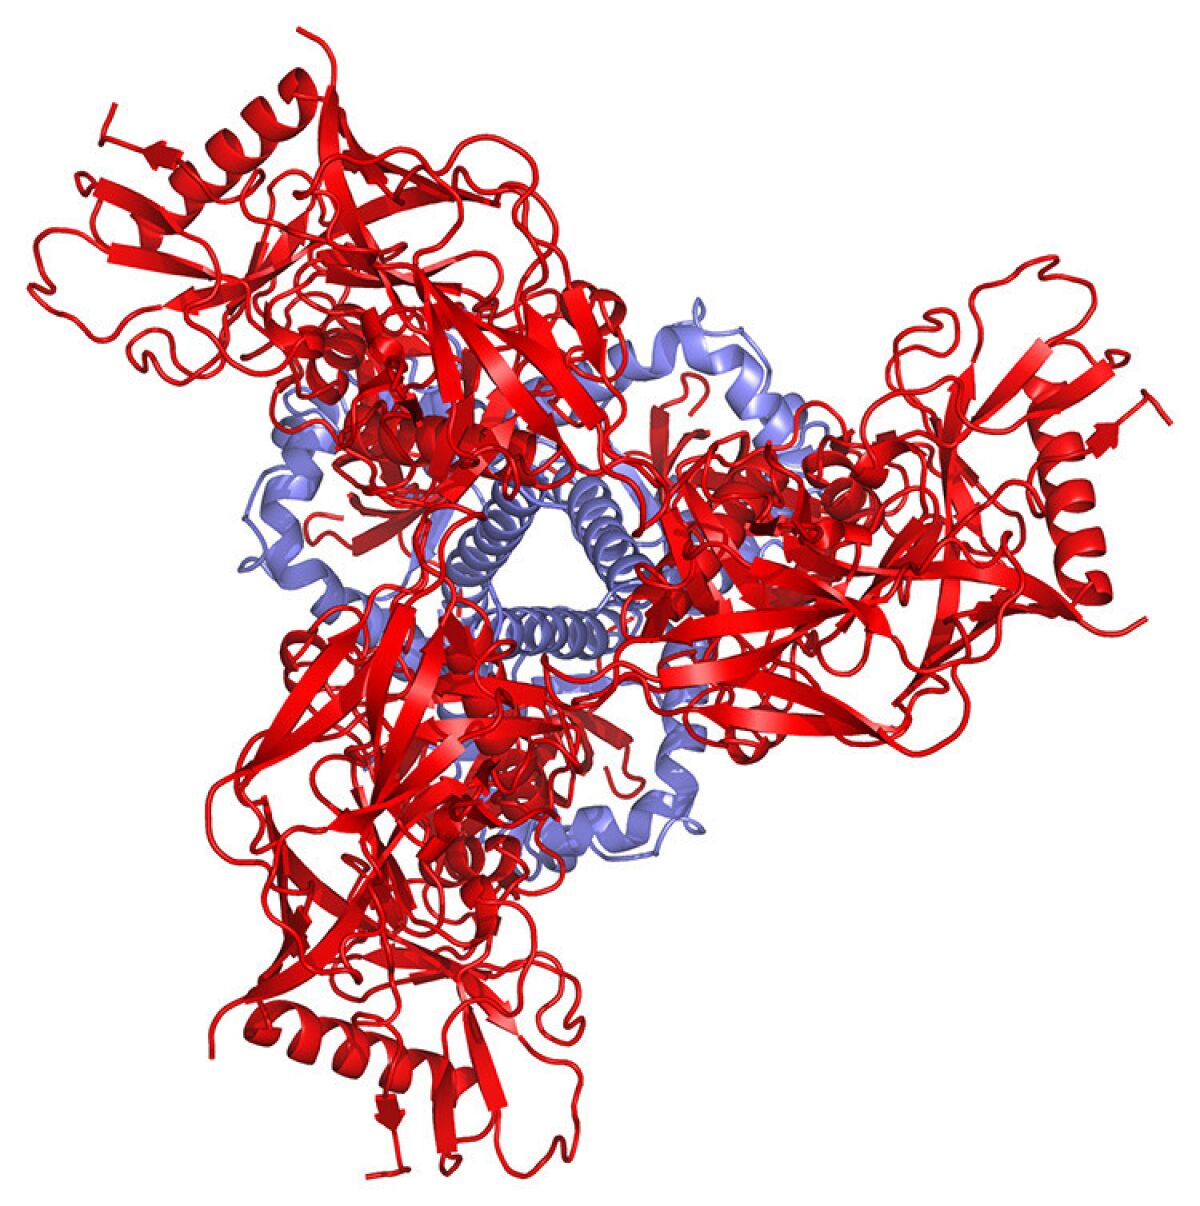 This schematic depicts the protein structure of the pre-fusion HIV spike as viewed from above. New insights into the structure of HIV's protein spikes have raised hopes for a vaccine that can stop the virus that causes AIDS. A clinical trial of one vaccine candidate will begin in South Africa in 2016.